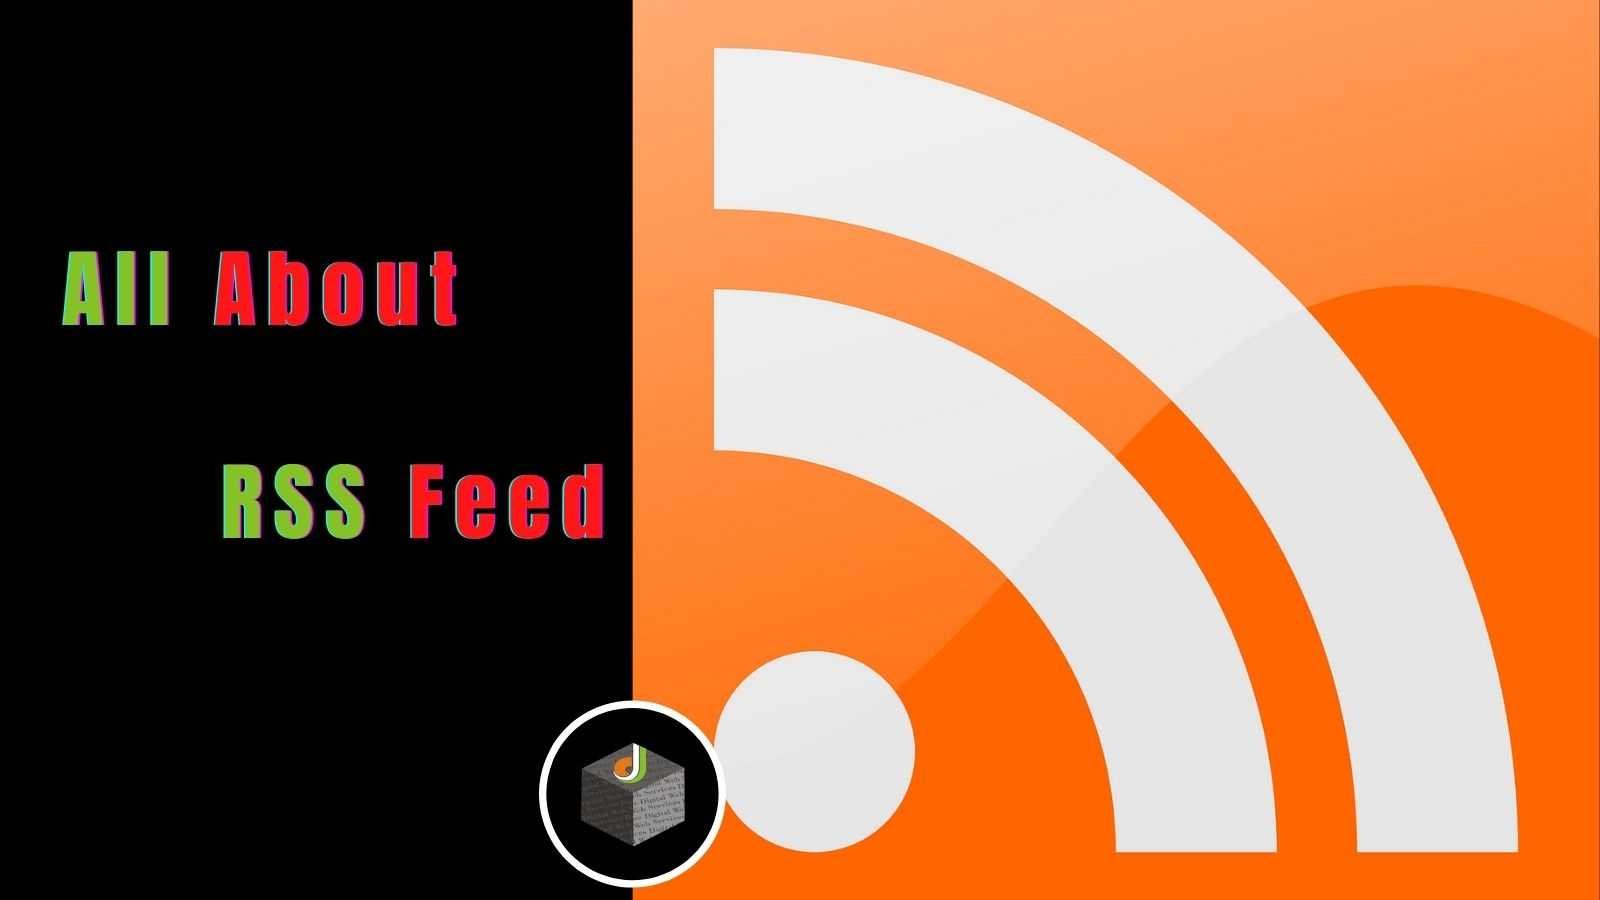 What is RSS Feed